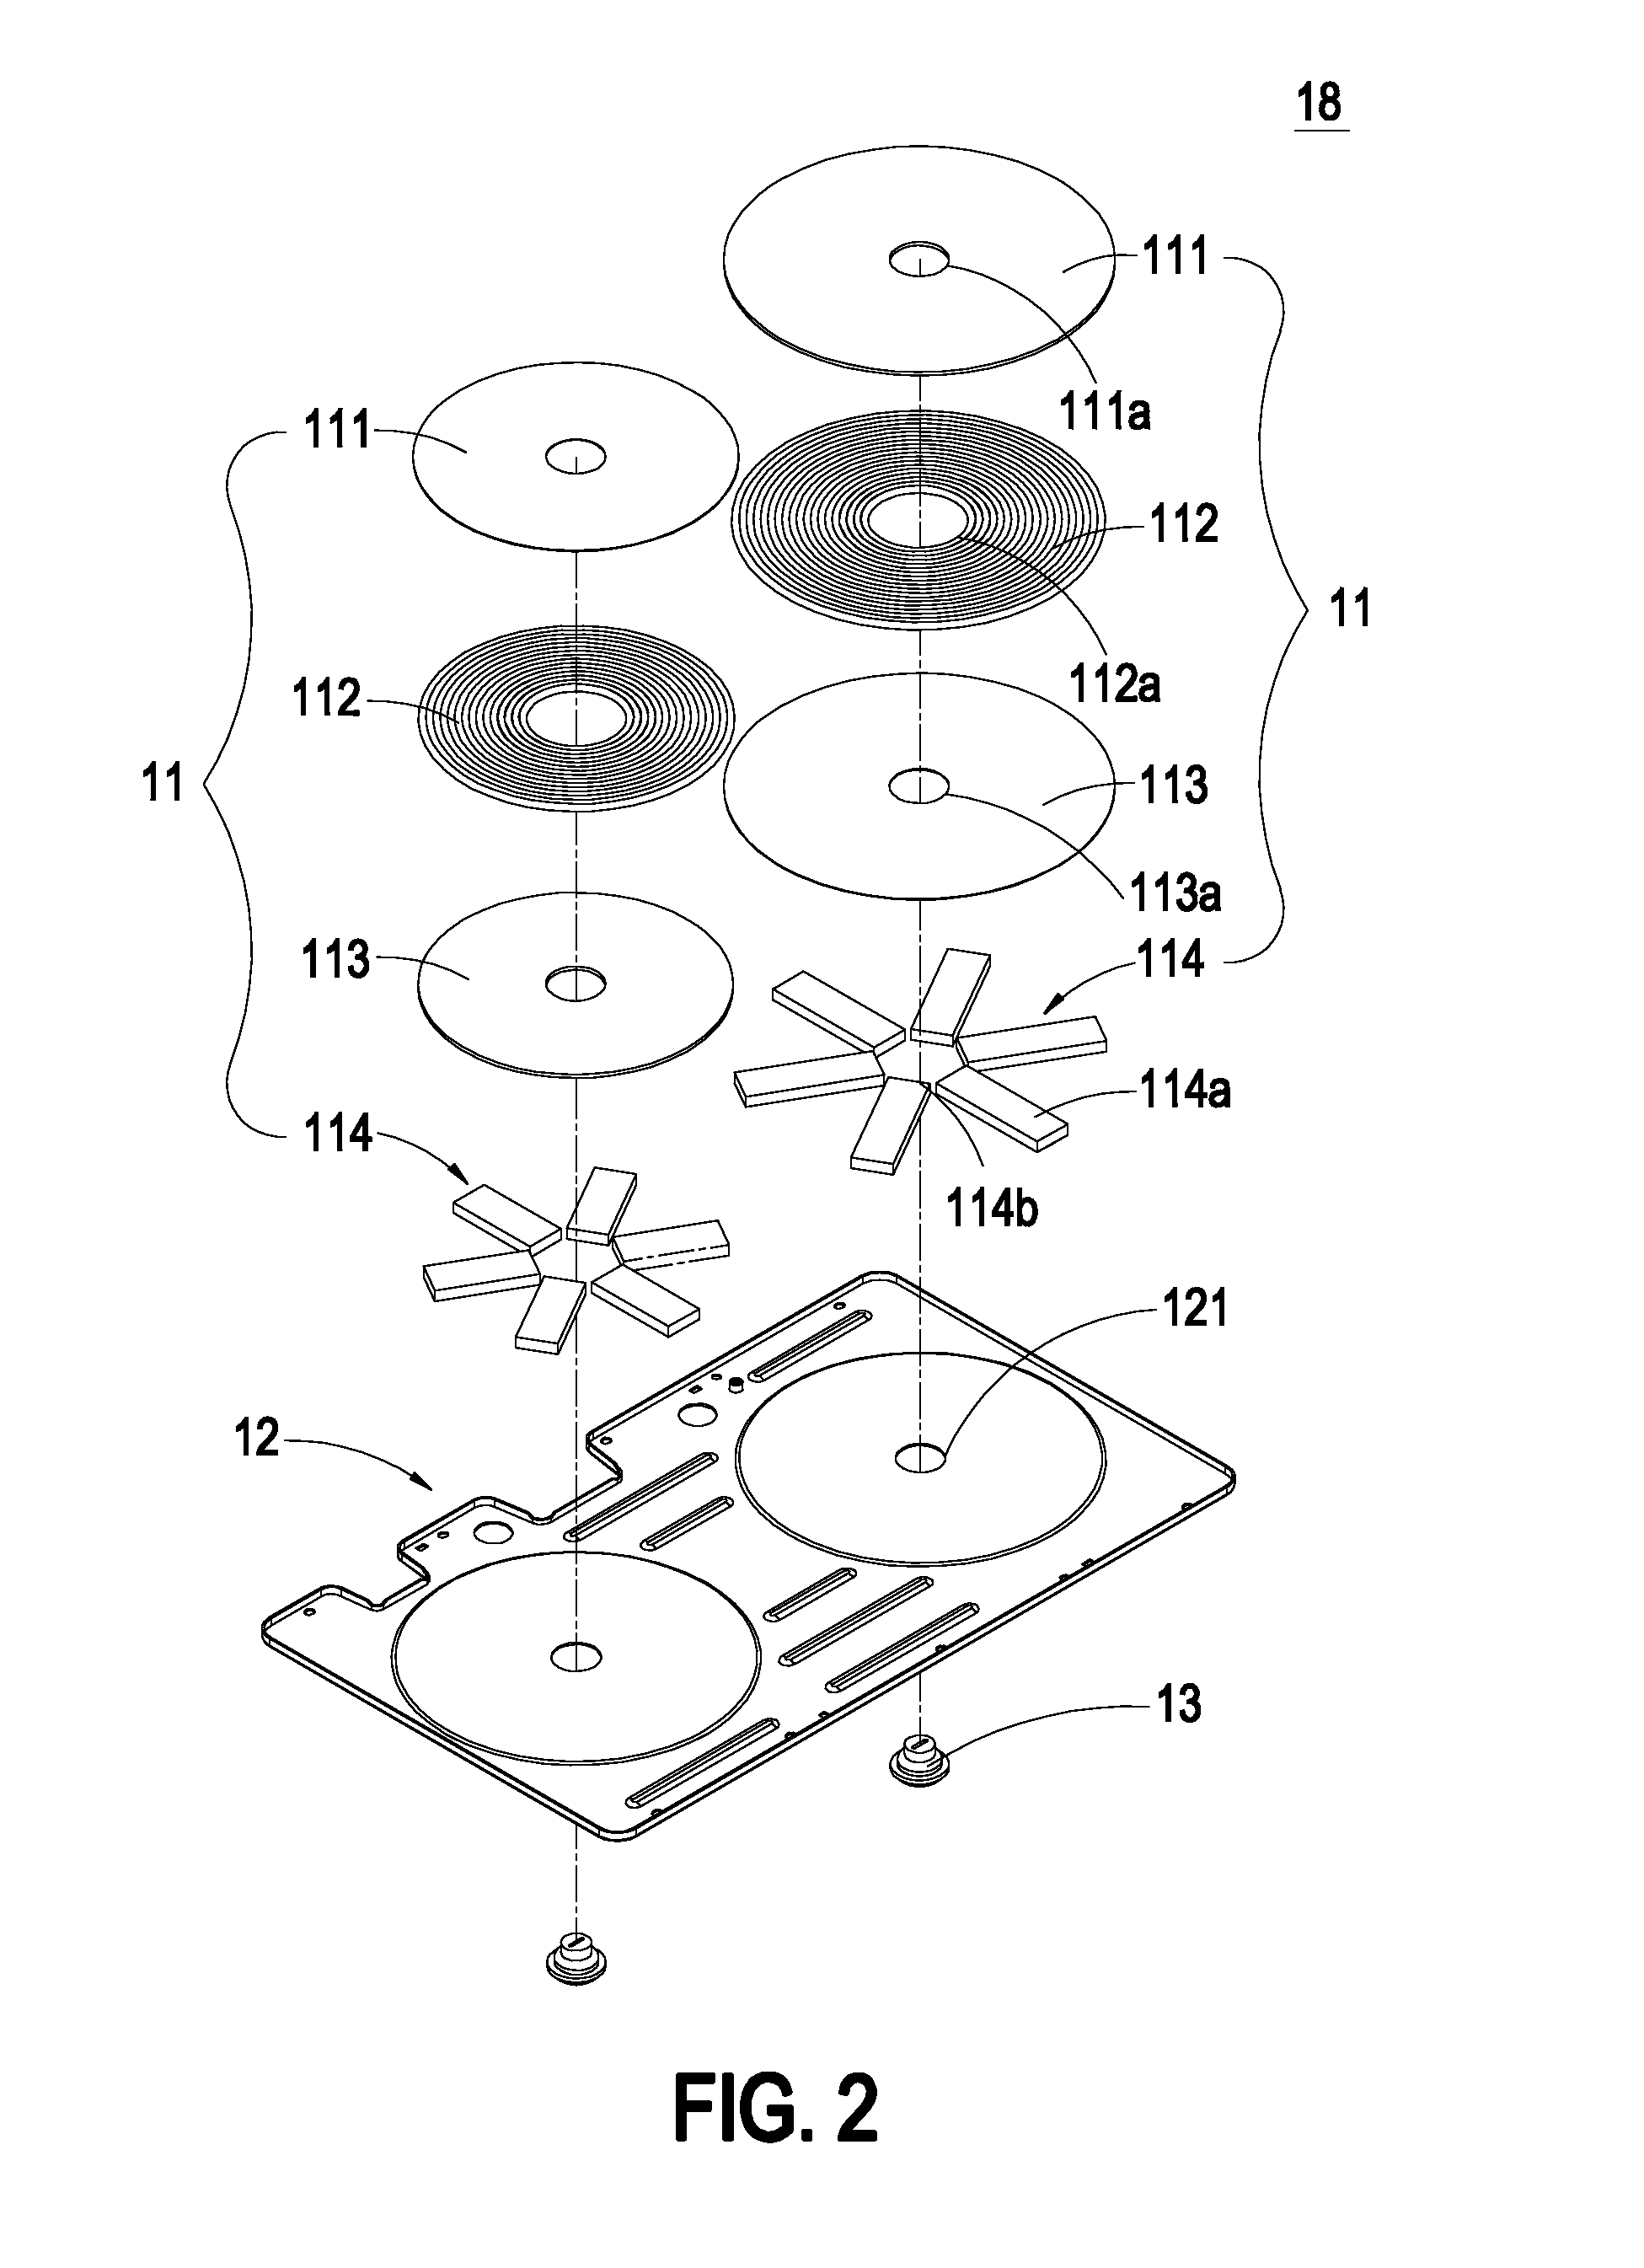 Electromagnetic module of electronic apparatus and manufacturing process thereof